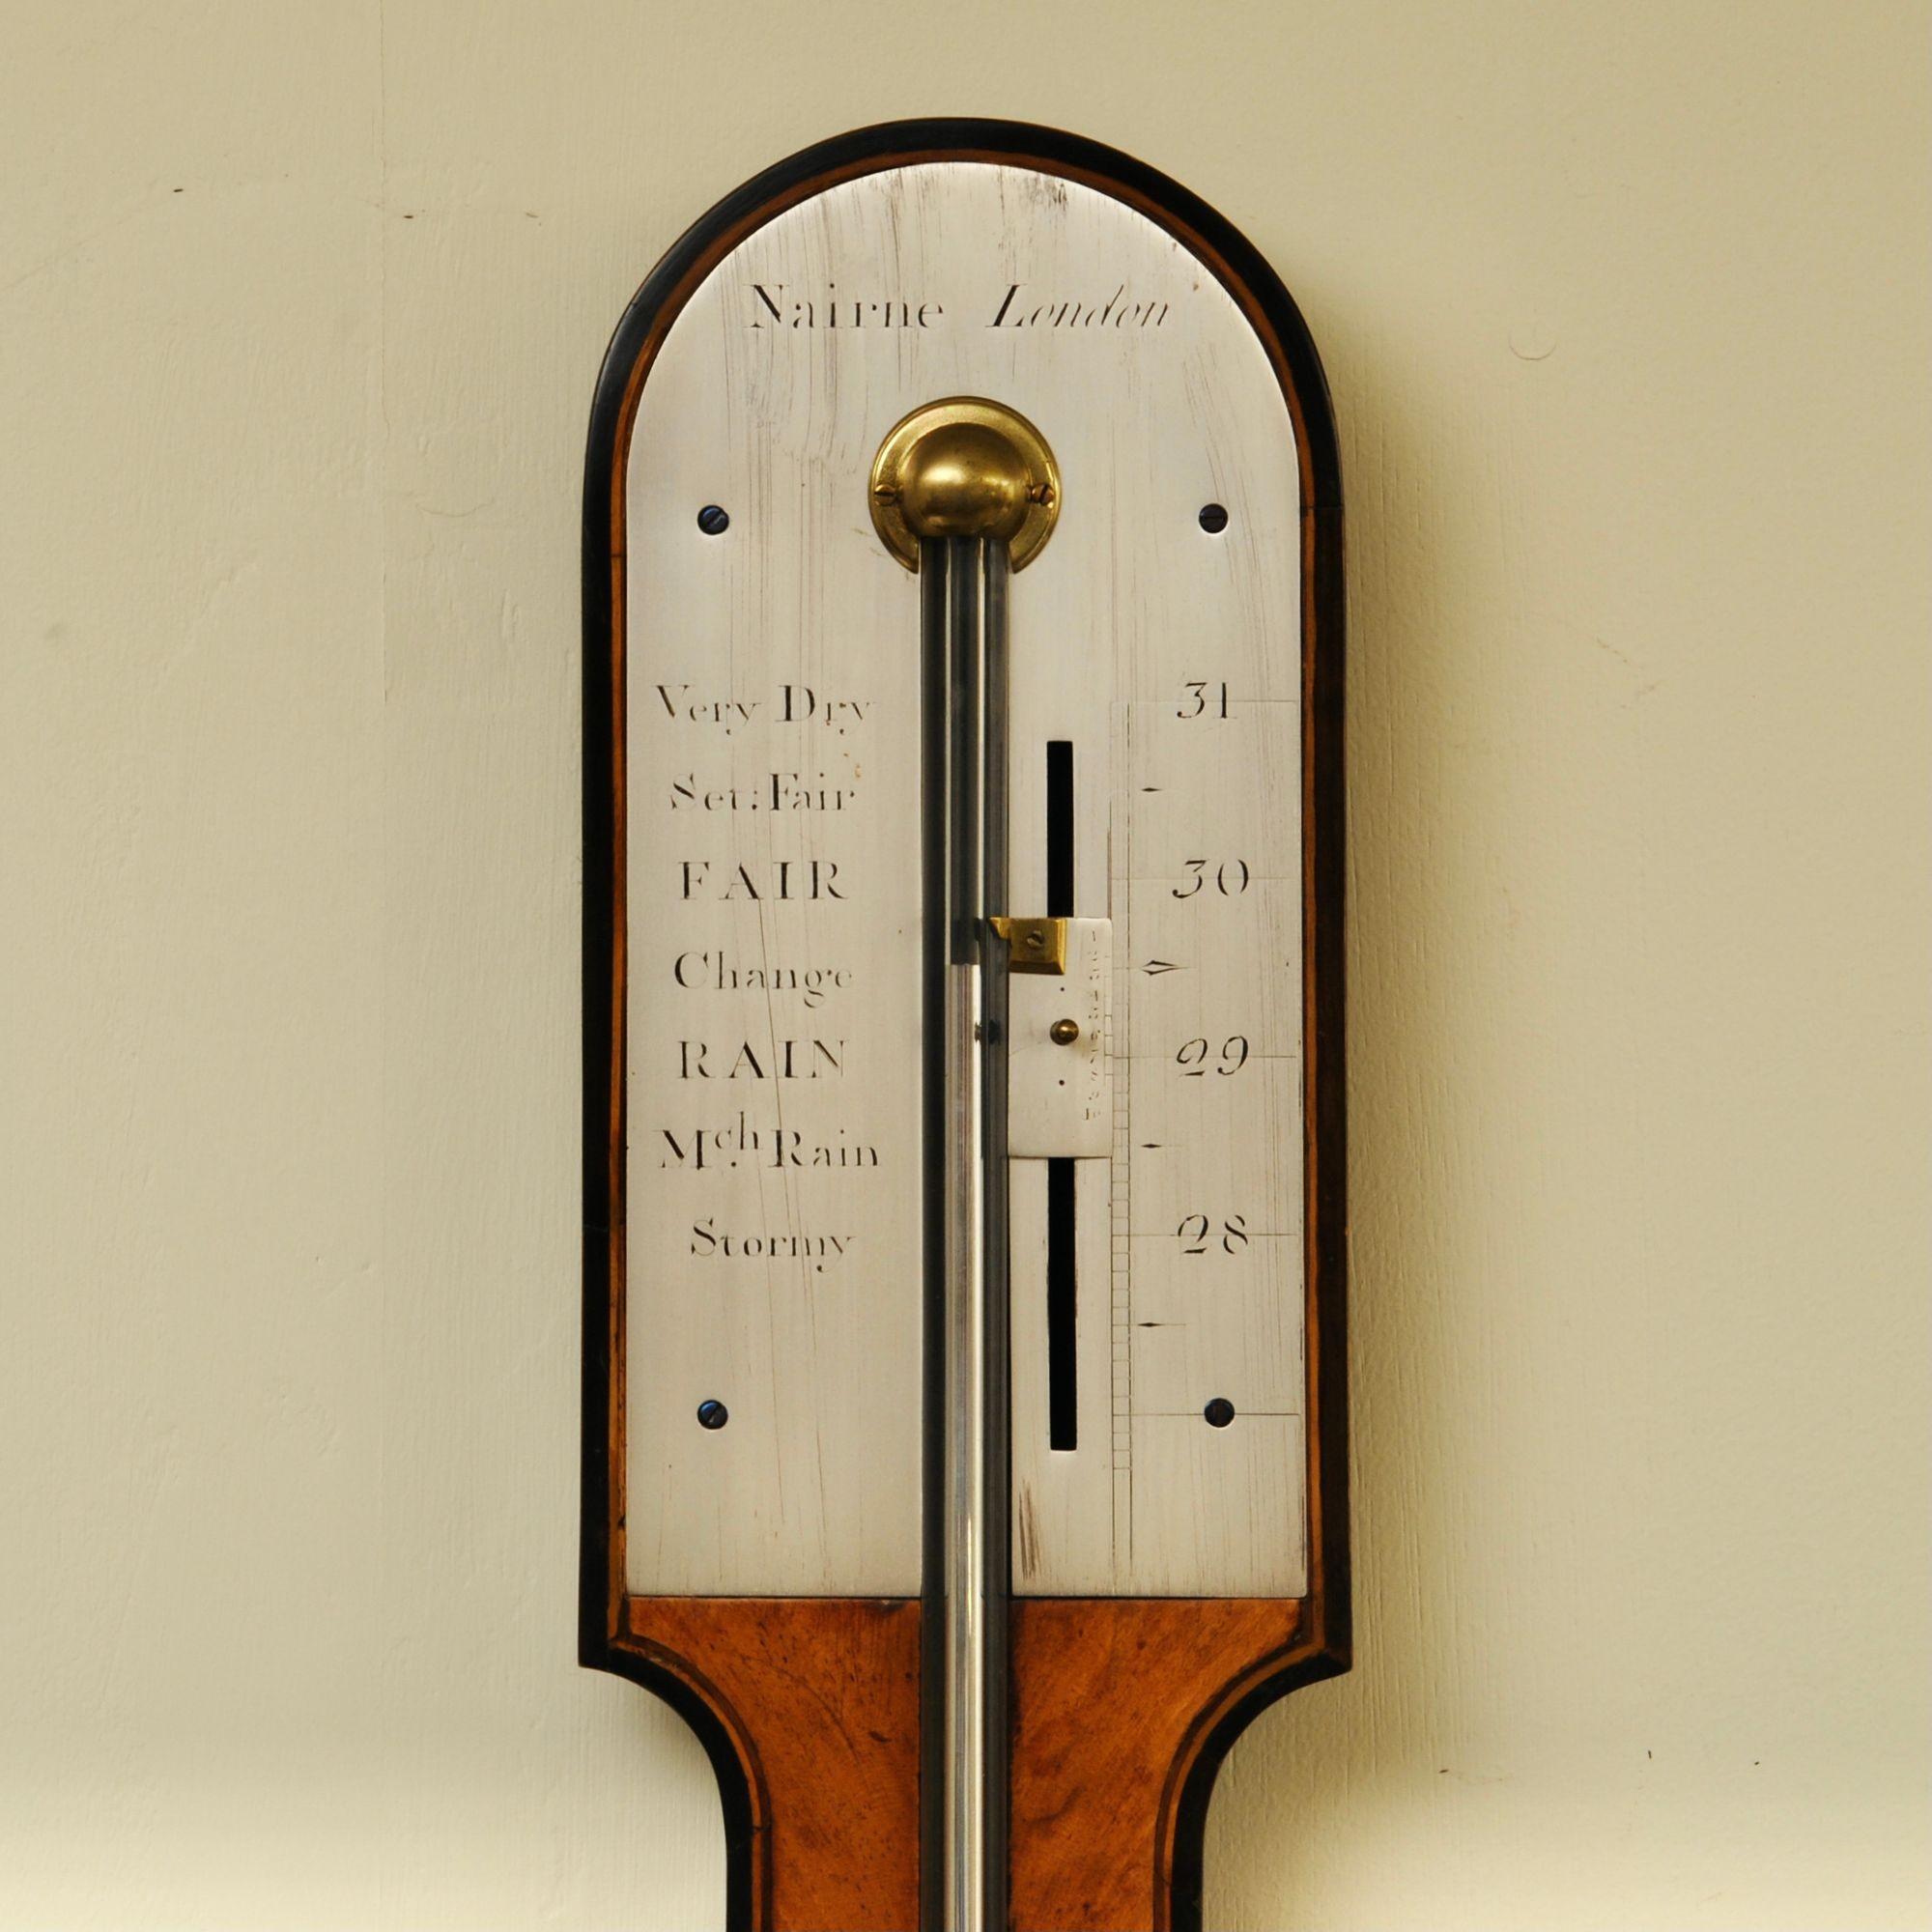 An elegant 18th century satinwood and ebony stick barometer by Edward Nairne, London.
Nairne was a famous 18th century scientific instrument and barometer maker and this example is of his usual high quality using fine timbers.